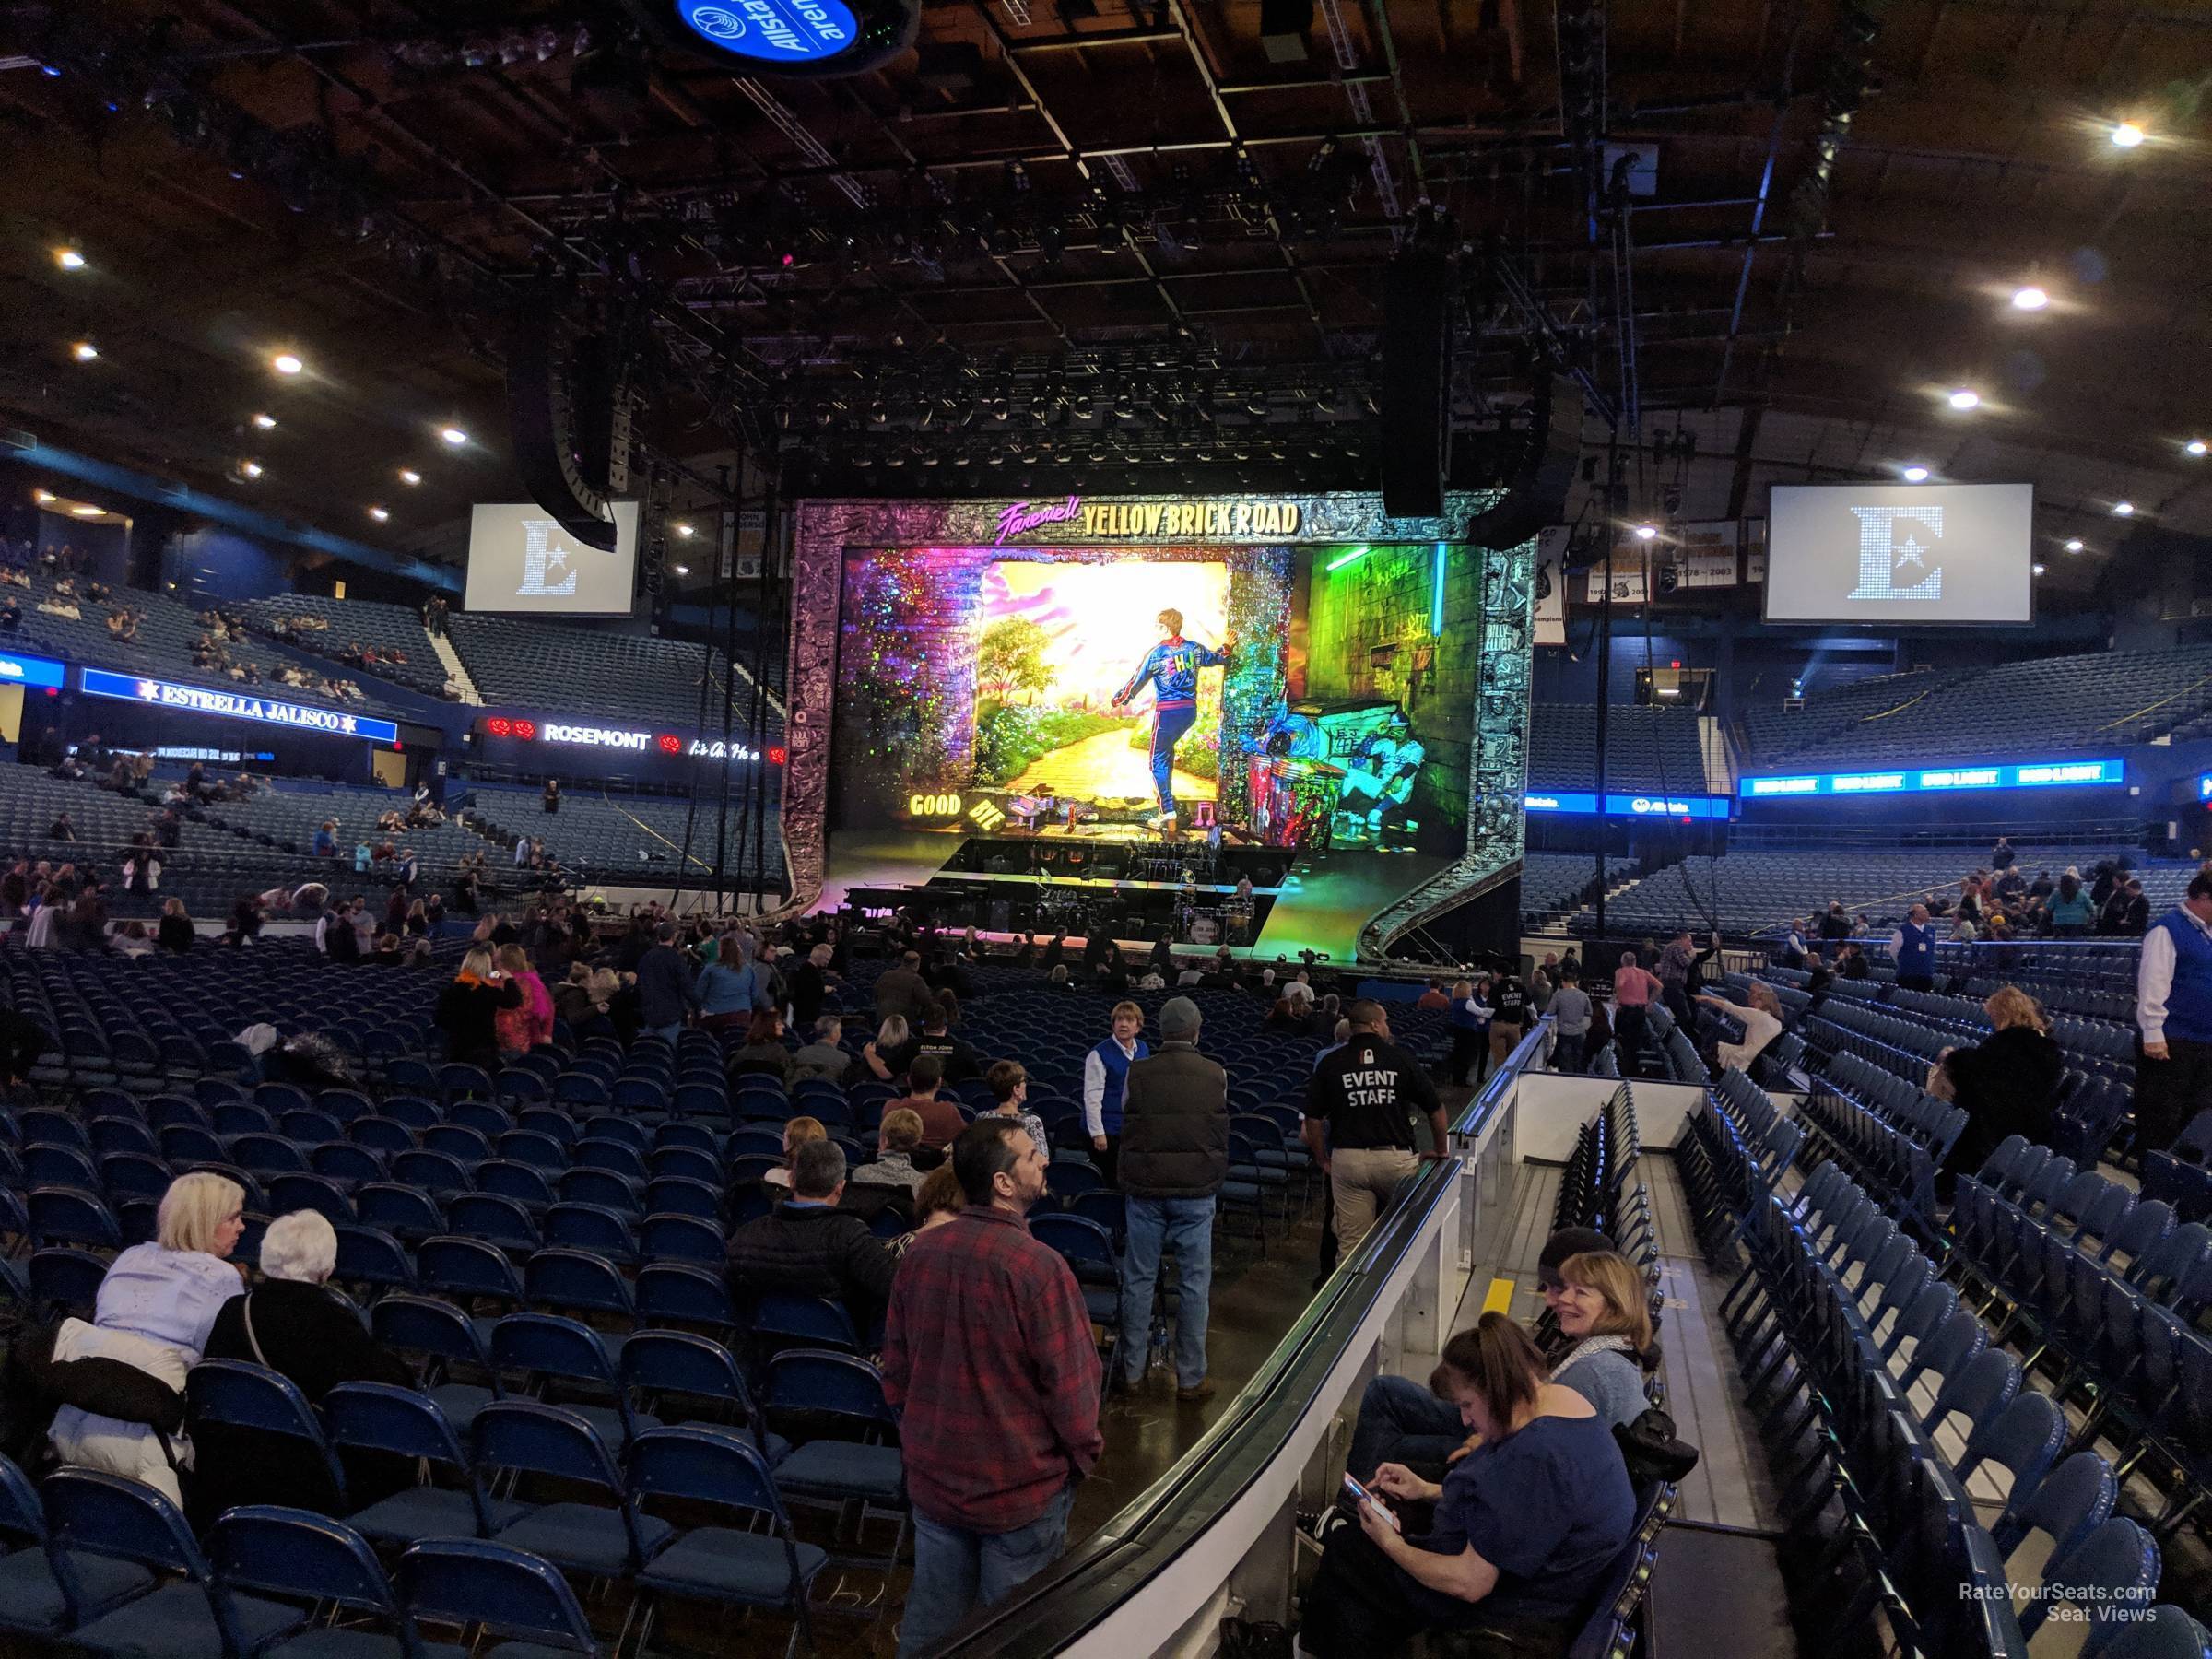 section 113, row dd seat view  for concert - allstate arena